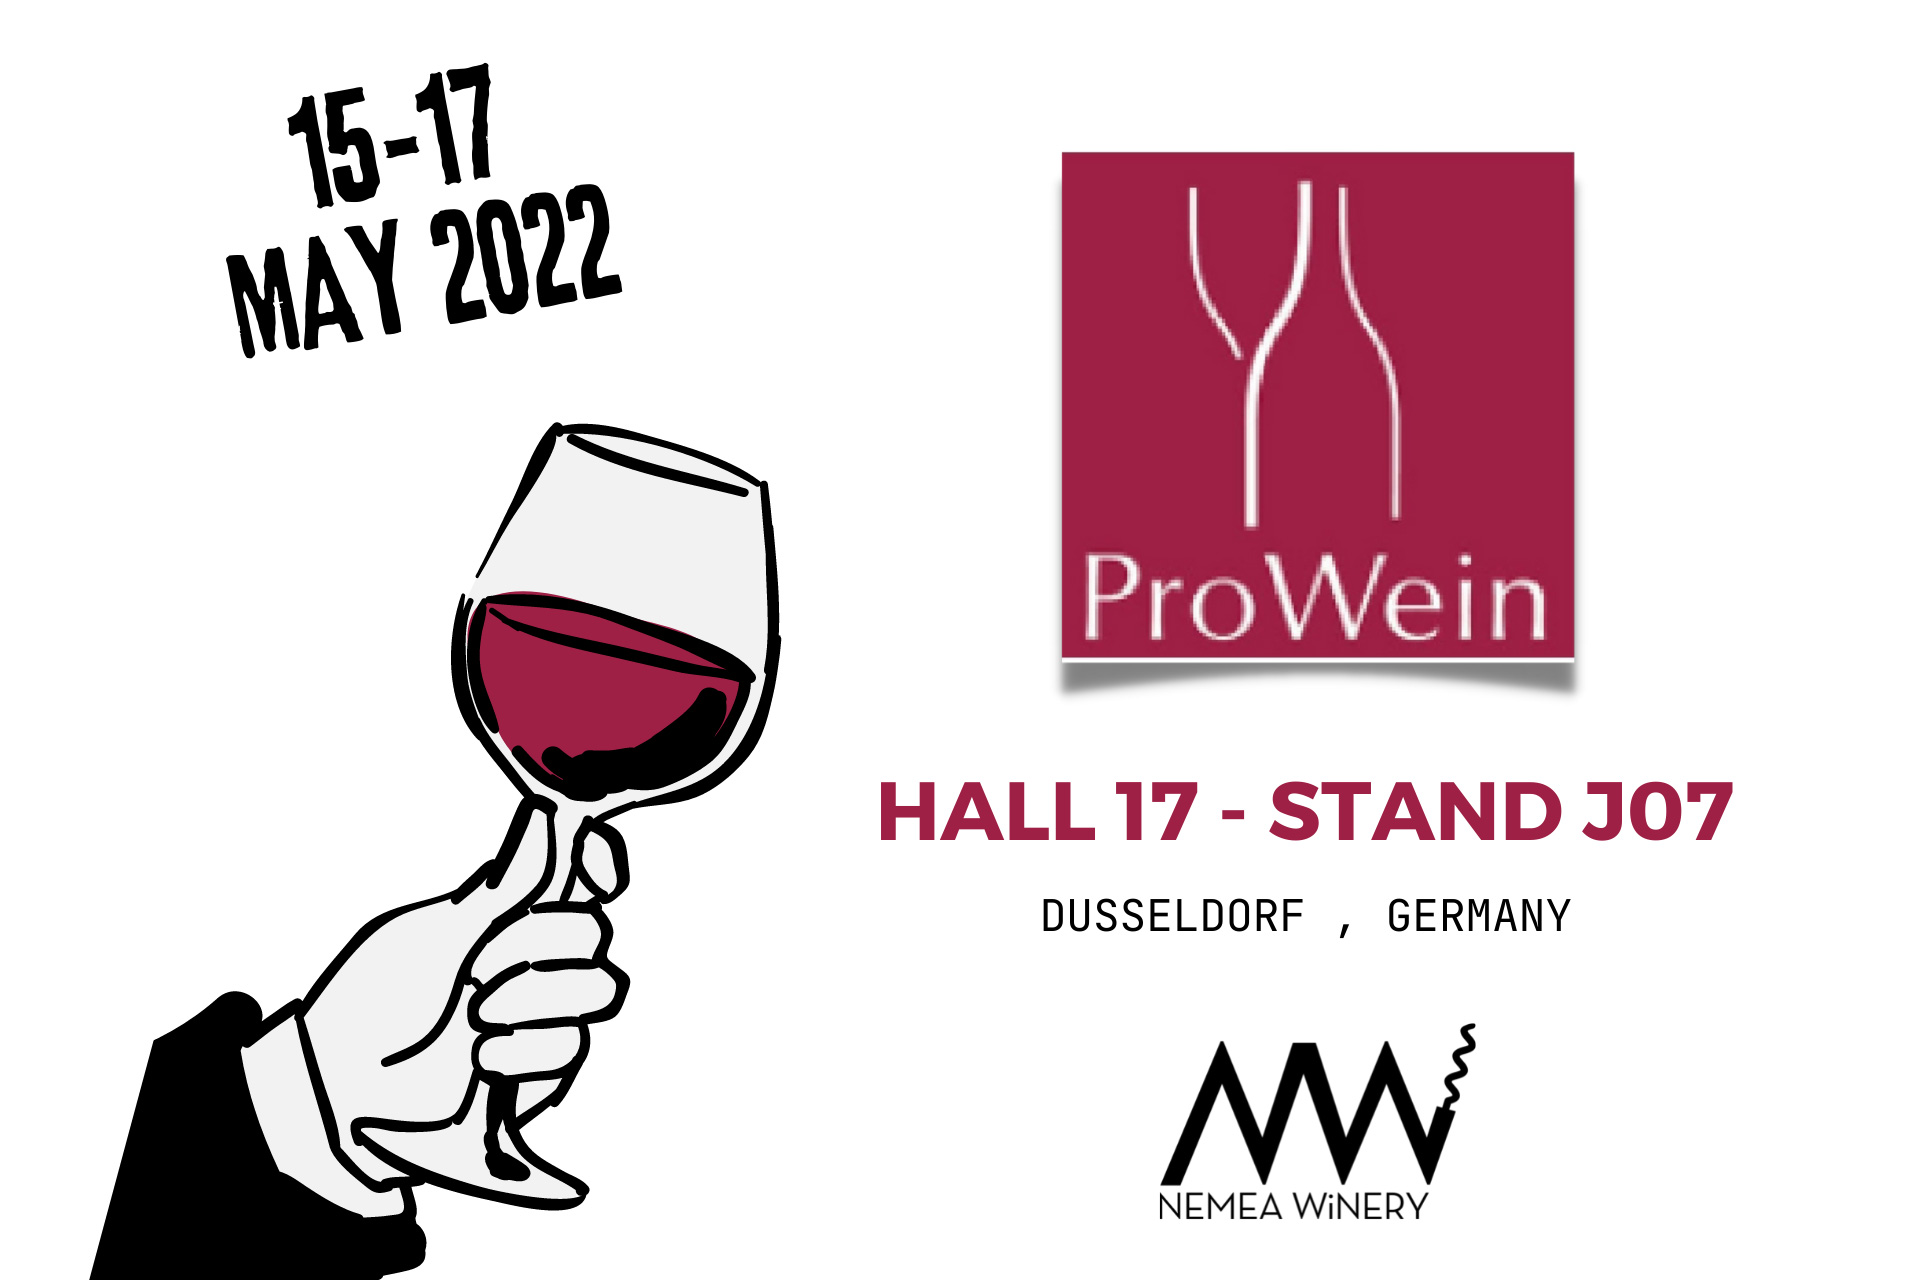 We participate in ProWein on May 15-17 - Room 17 Stand J07